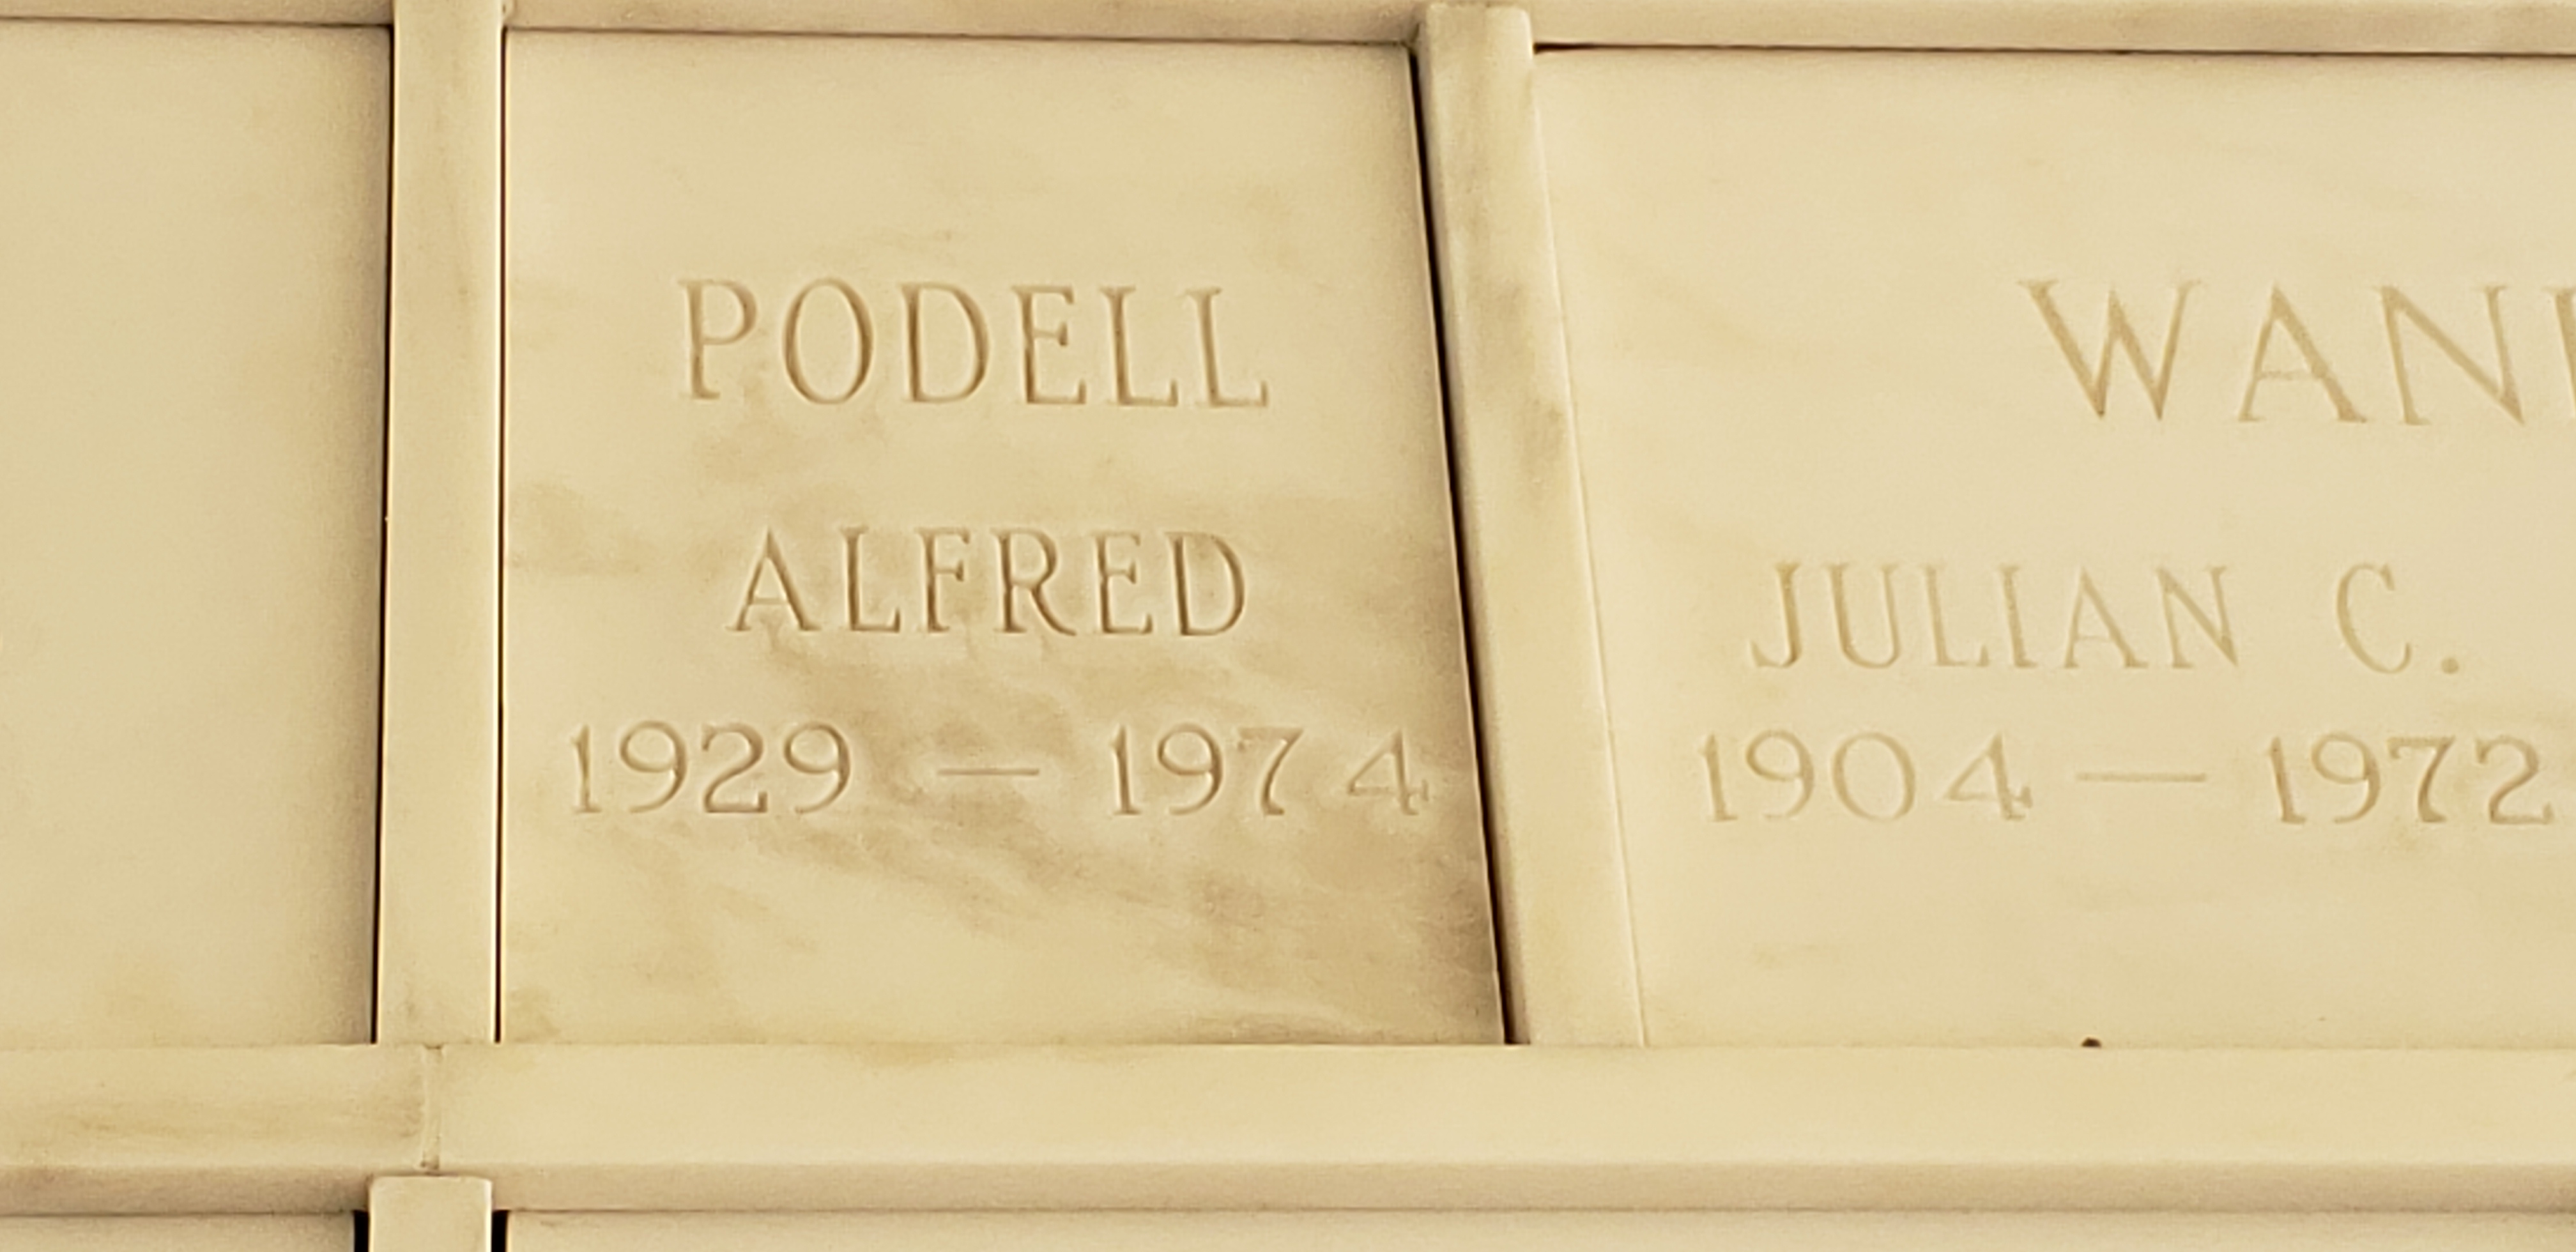 Alfred Podell